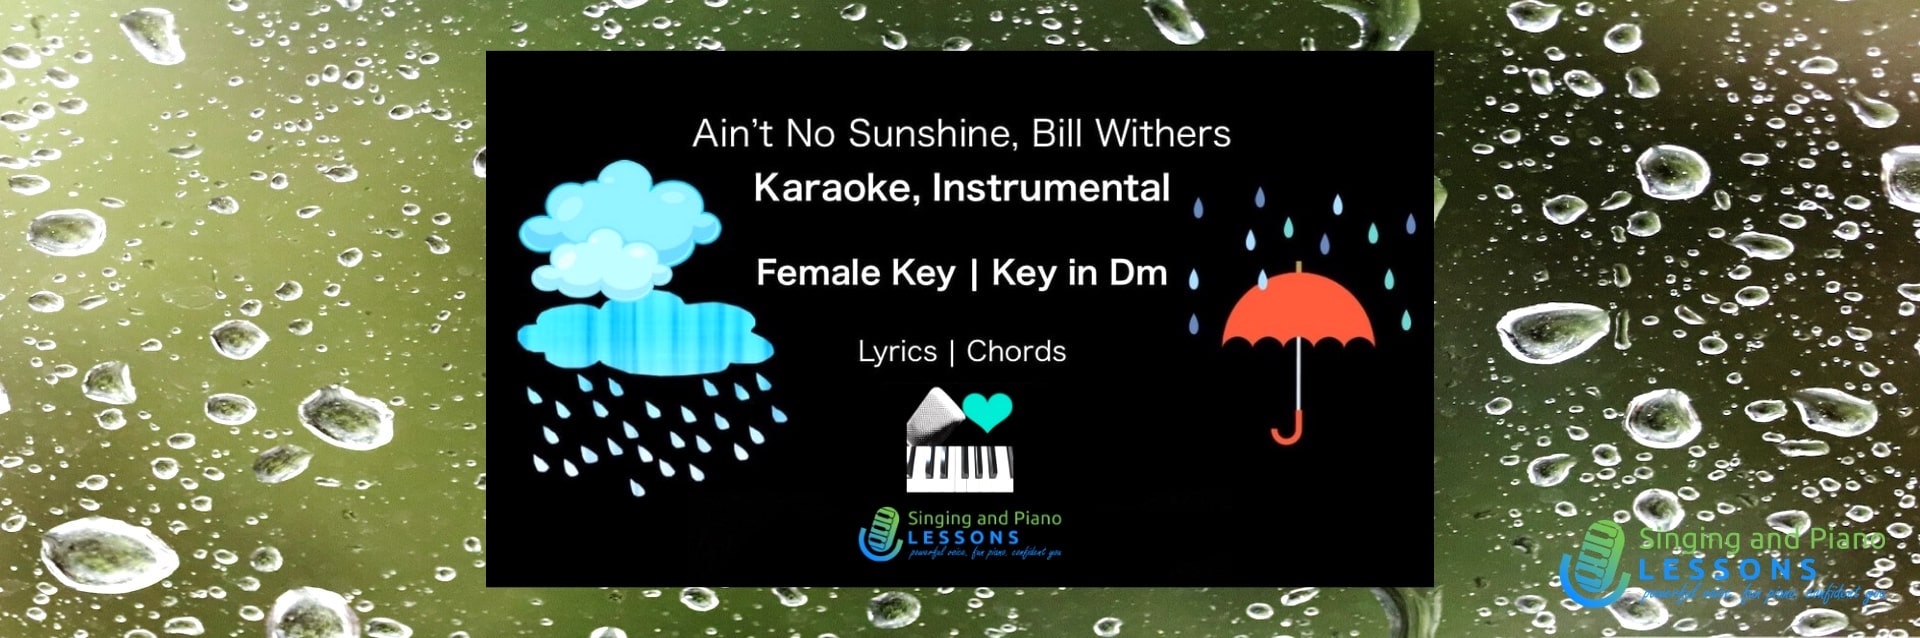 Ain't no sunshine by Bill Withers Karaoke instrumental in Female Key/ Baritone for Males